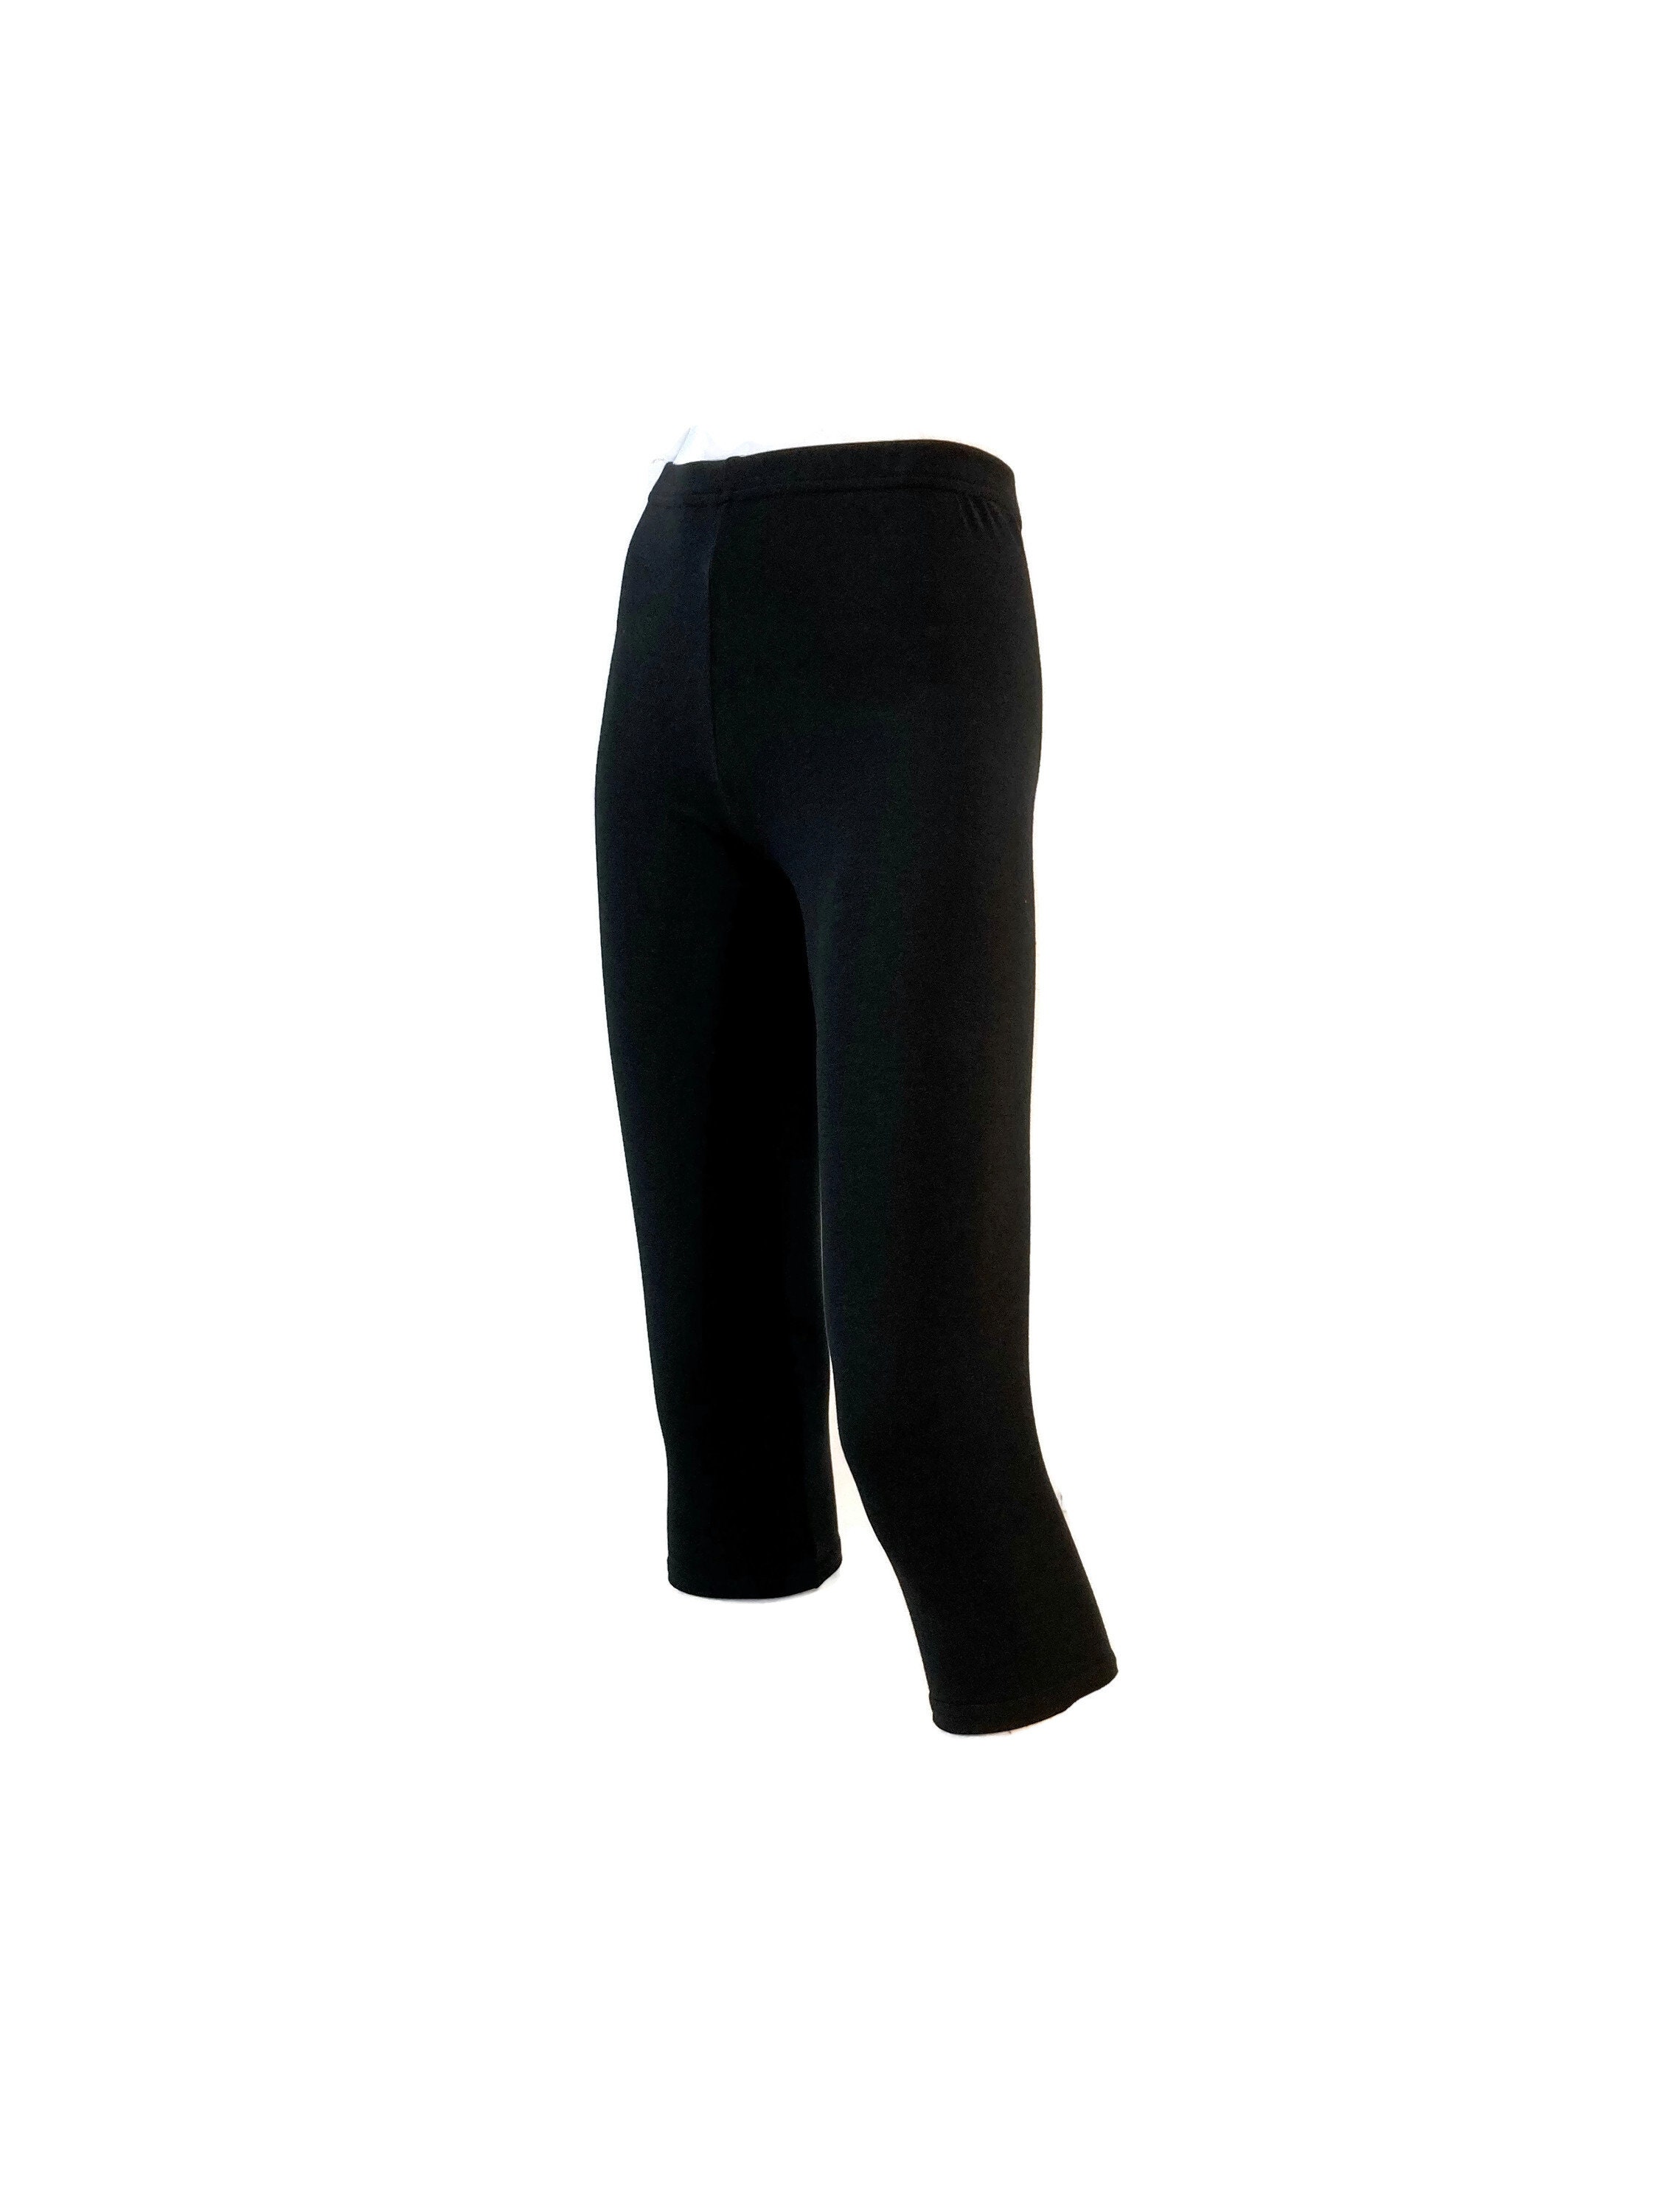 Capri Leggings in Bamboo/cotton/spandex Jersey With 4 Way Stretch. 